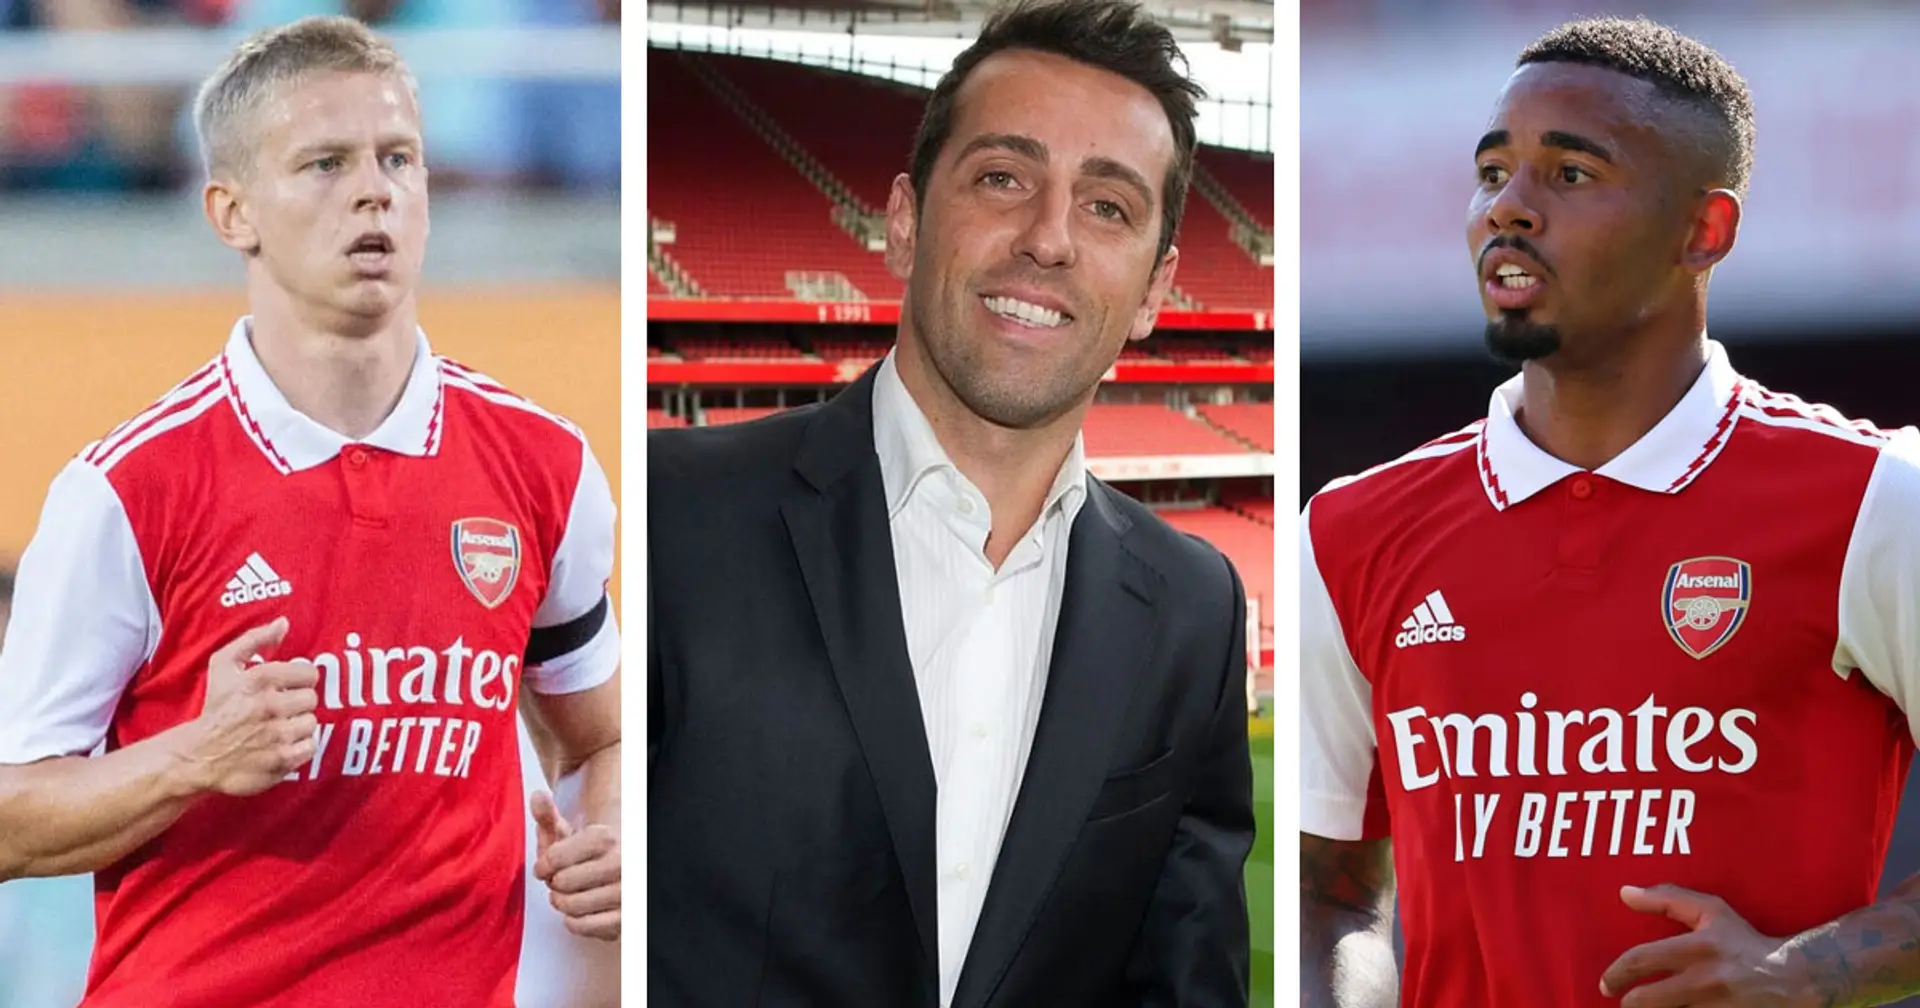 ‘Happy with the attacking options’: Arsenal fans rate summer transfer business after window closes